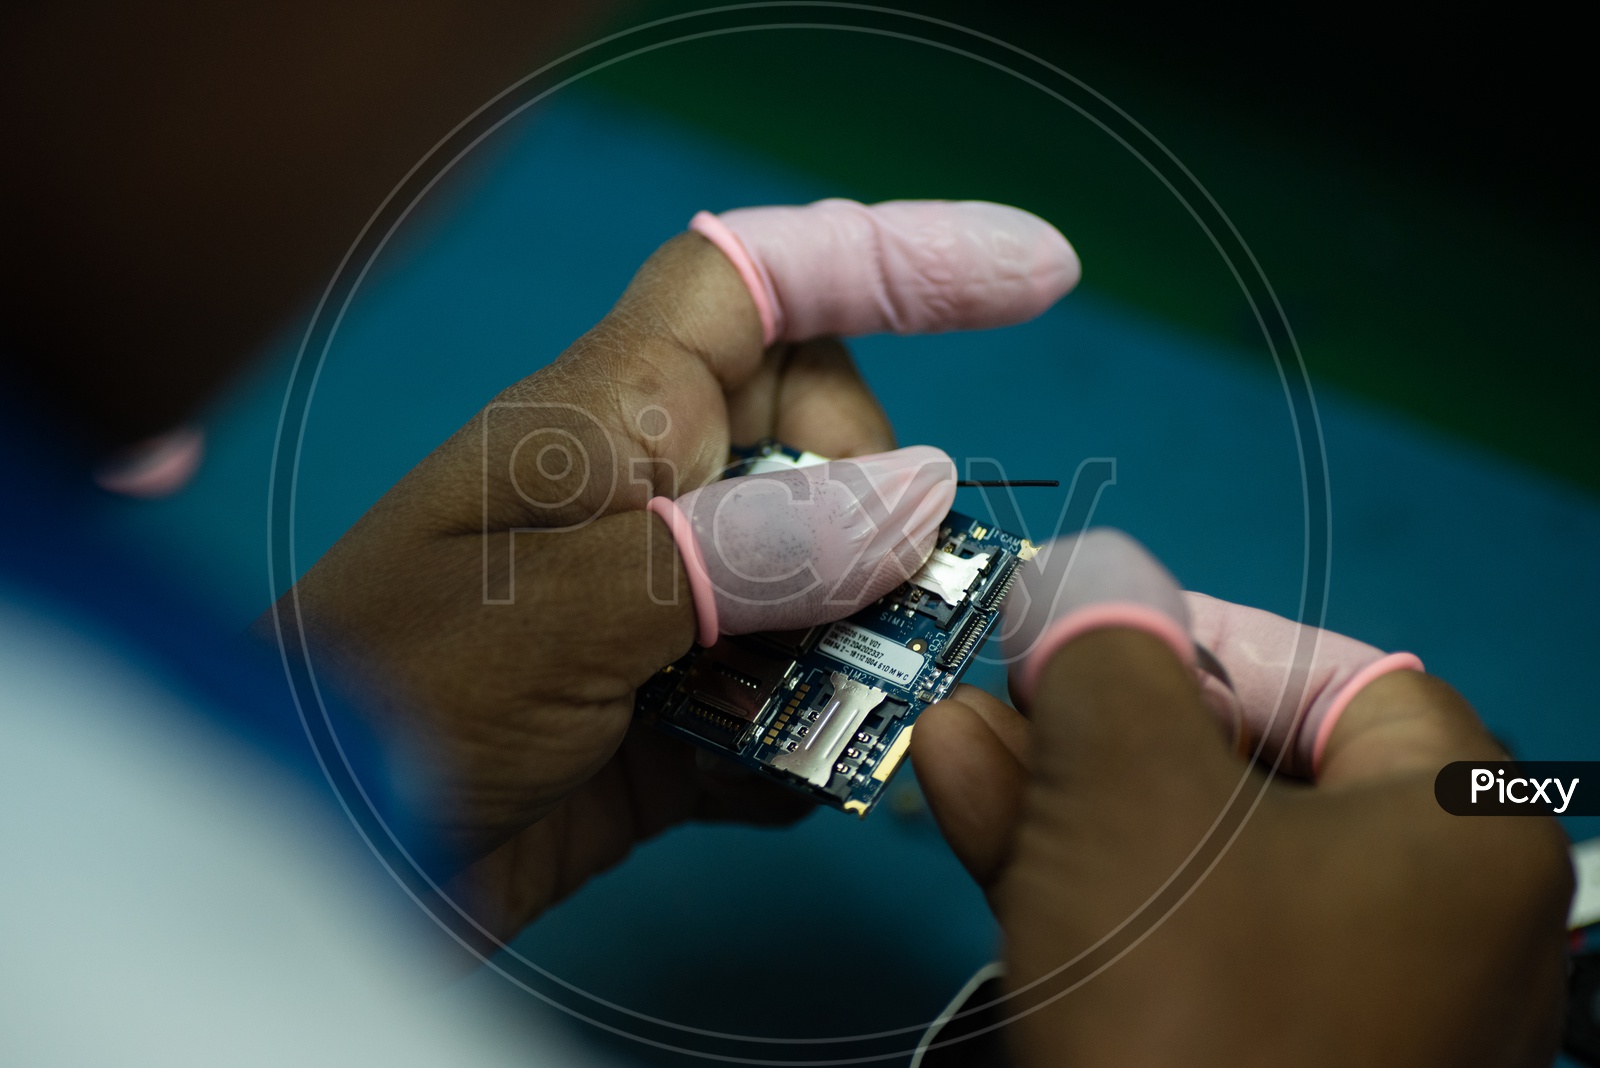 Technicians Manually Assembling The Micro Parts in a Phone Manufacturing Unit